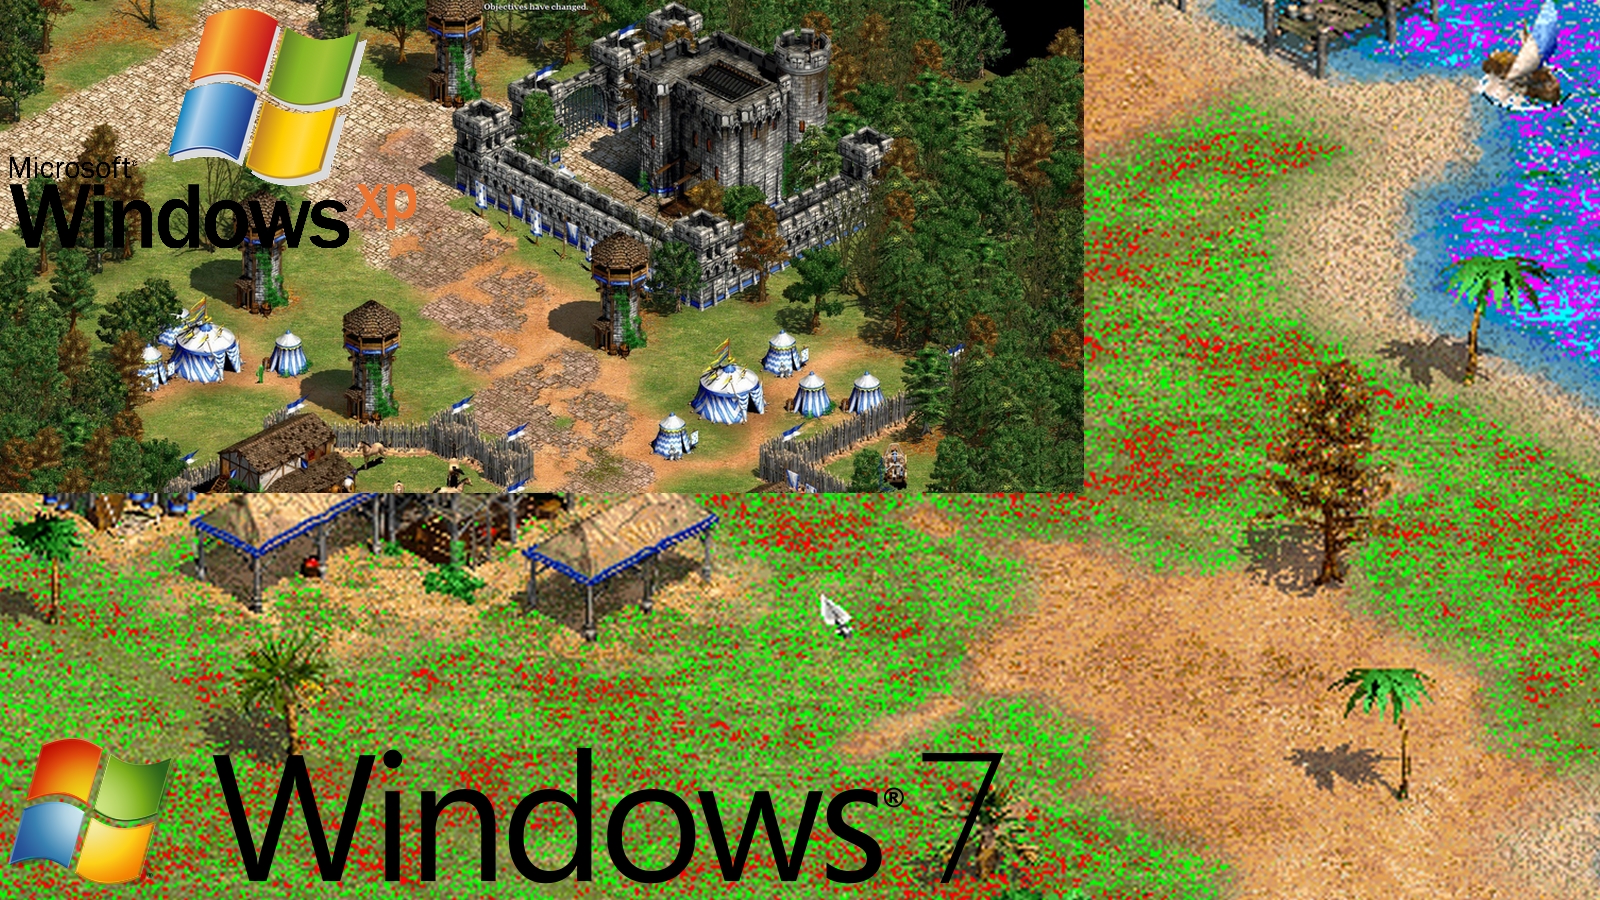 How to download age of empires 2 on windows 10 Tải Age Of Empires Aoe 2 đế Chế 2 Full Crack Mới Nhất 2020